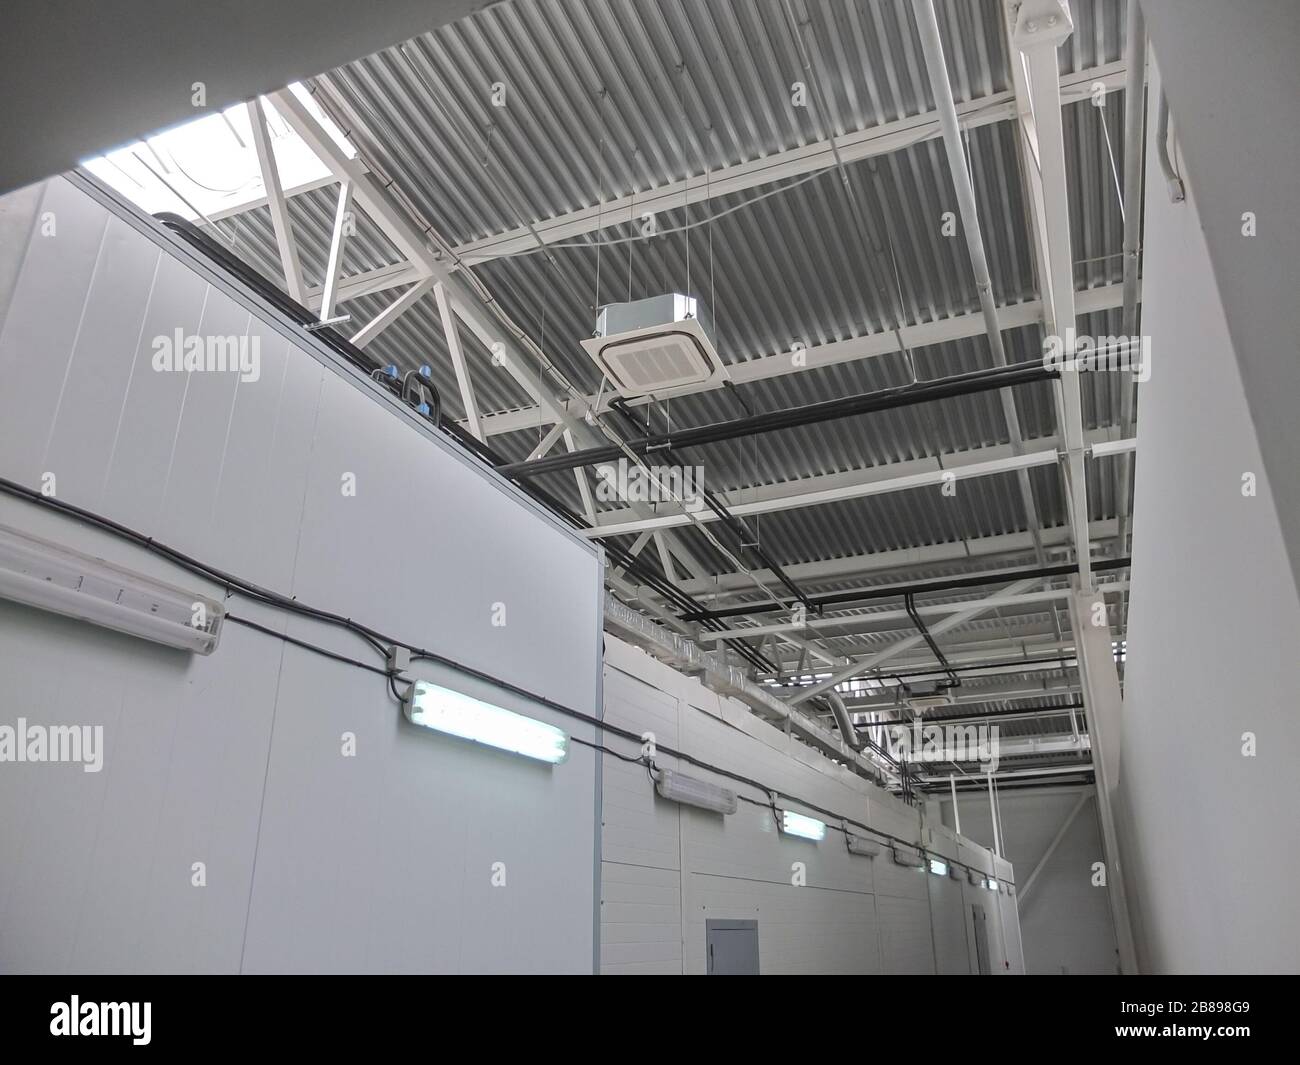 Pipelines of air conditioning and ventilation systems under the roof of the building above the cold rooms of the modern food market Stock Photo